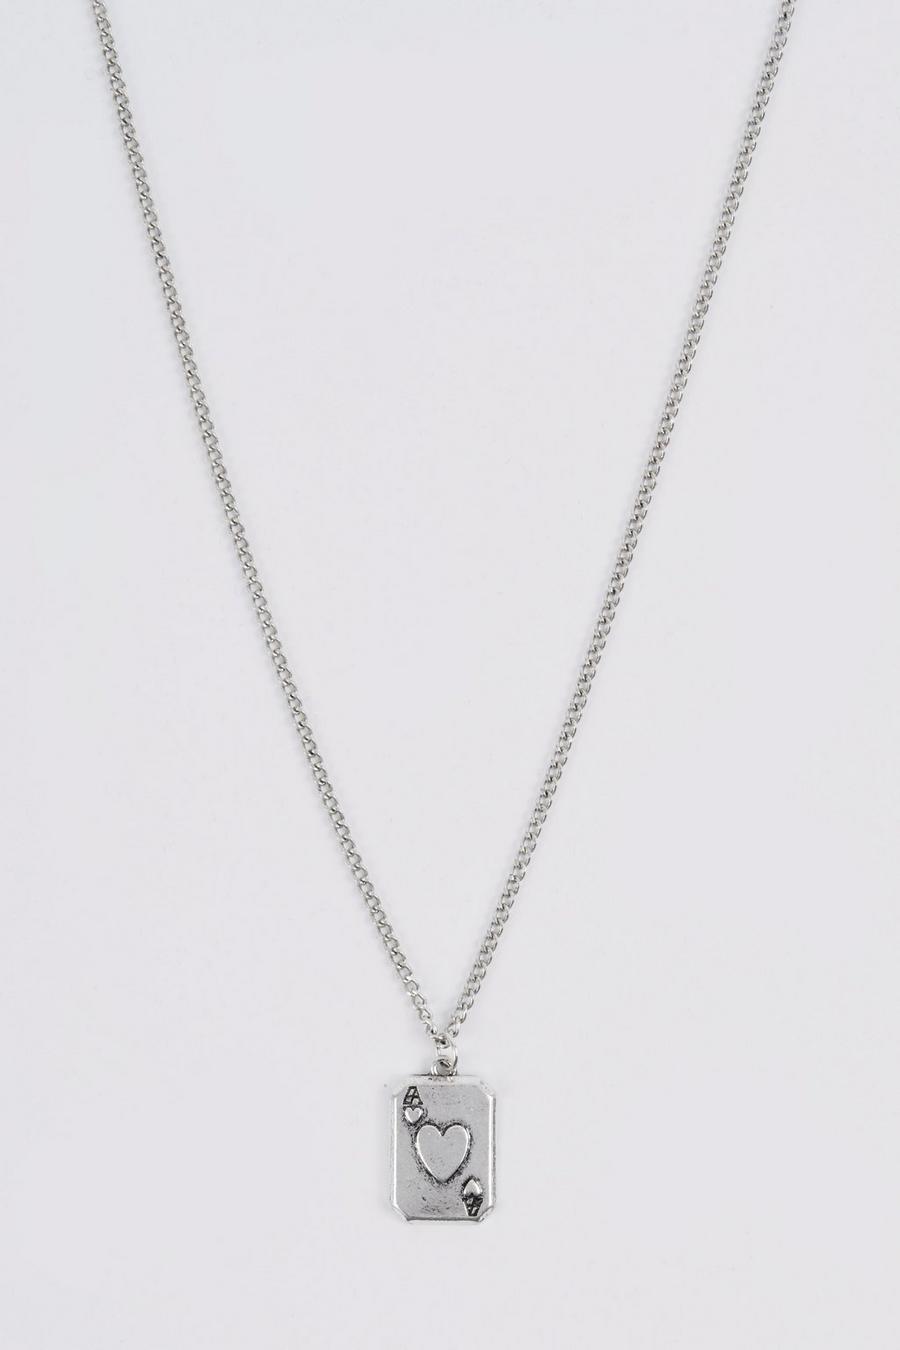 Silver Ace Of Hearts Necklace In Gift Bag